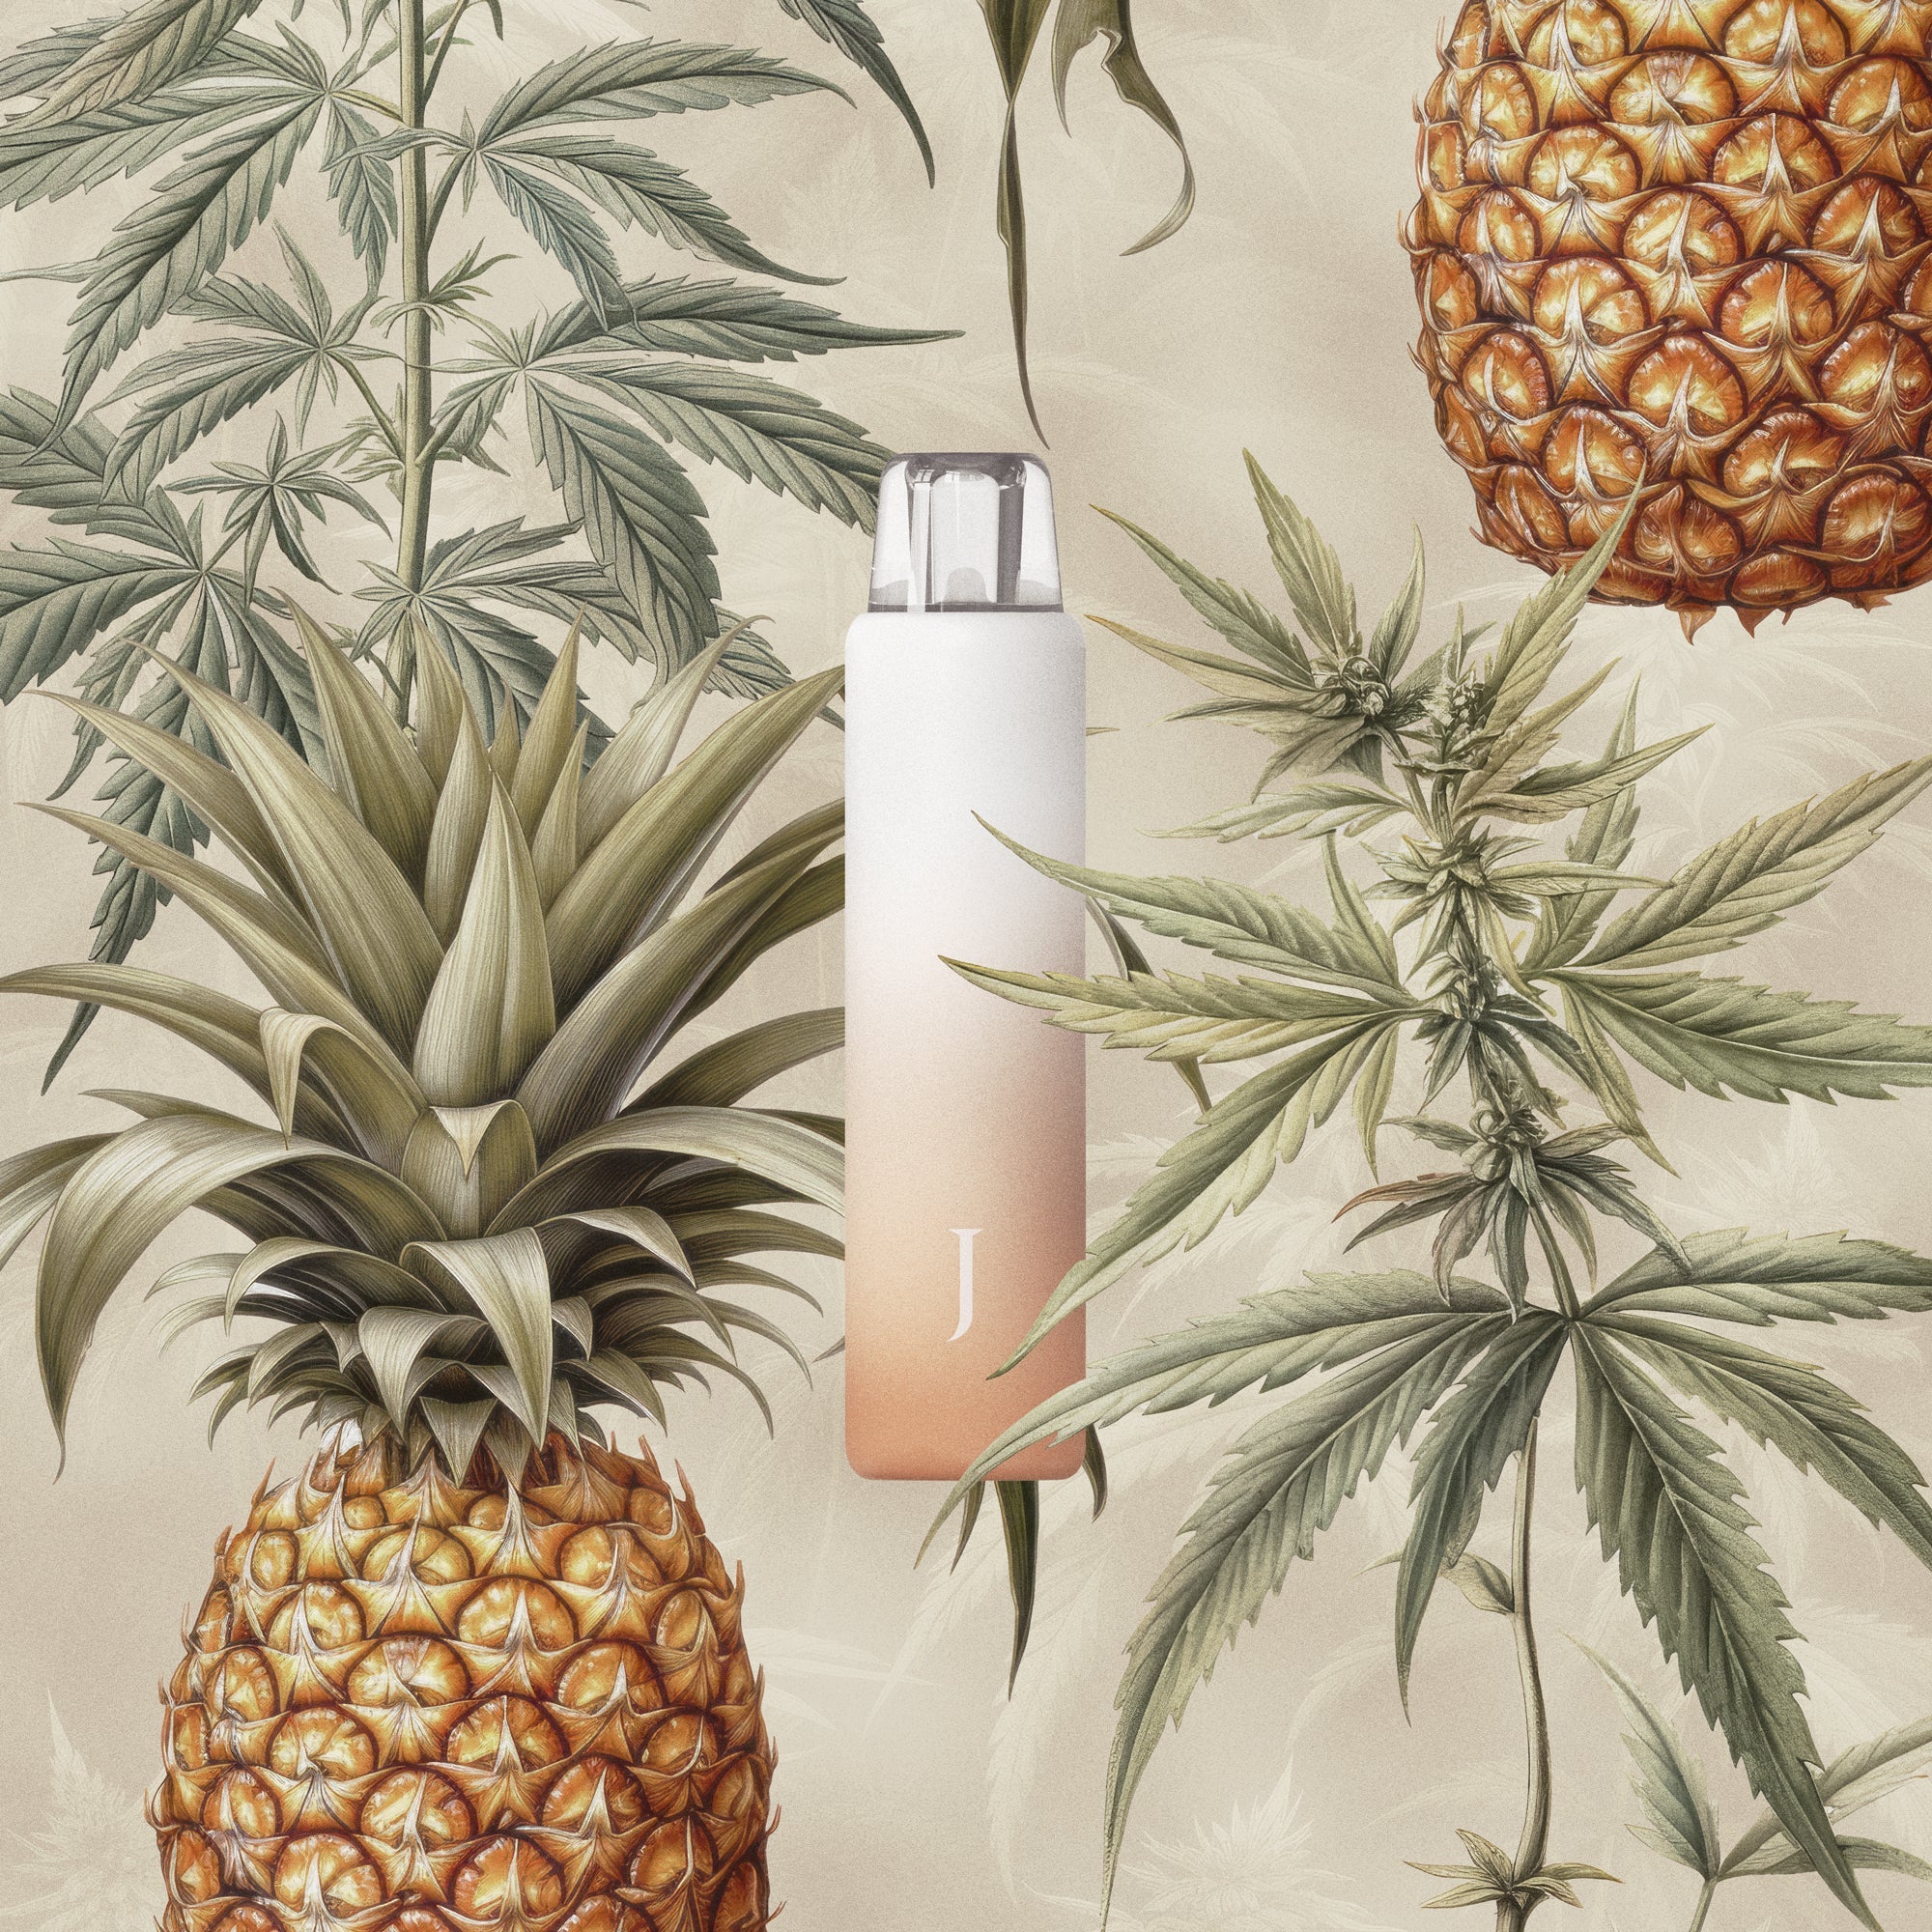 Juana Cannabis All-in-One Cannabis Vape Pen with Marijuana Leaves and Pineapple Botanical Illustrations